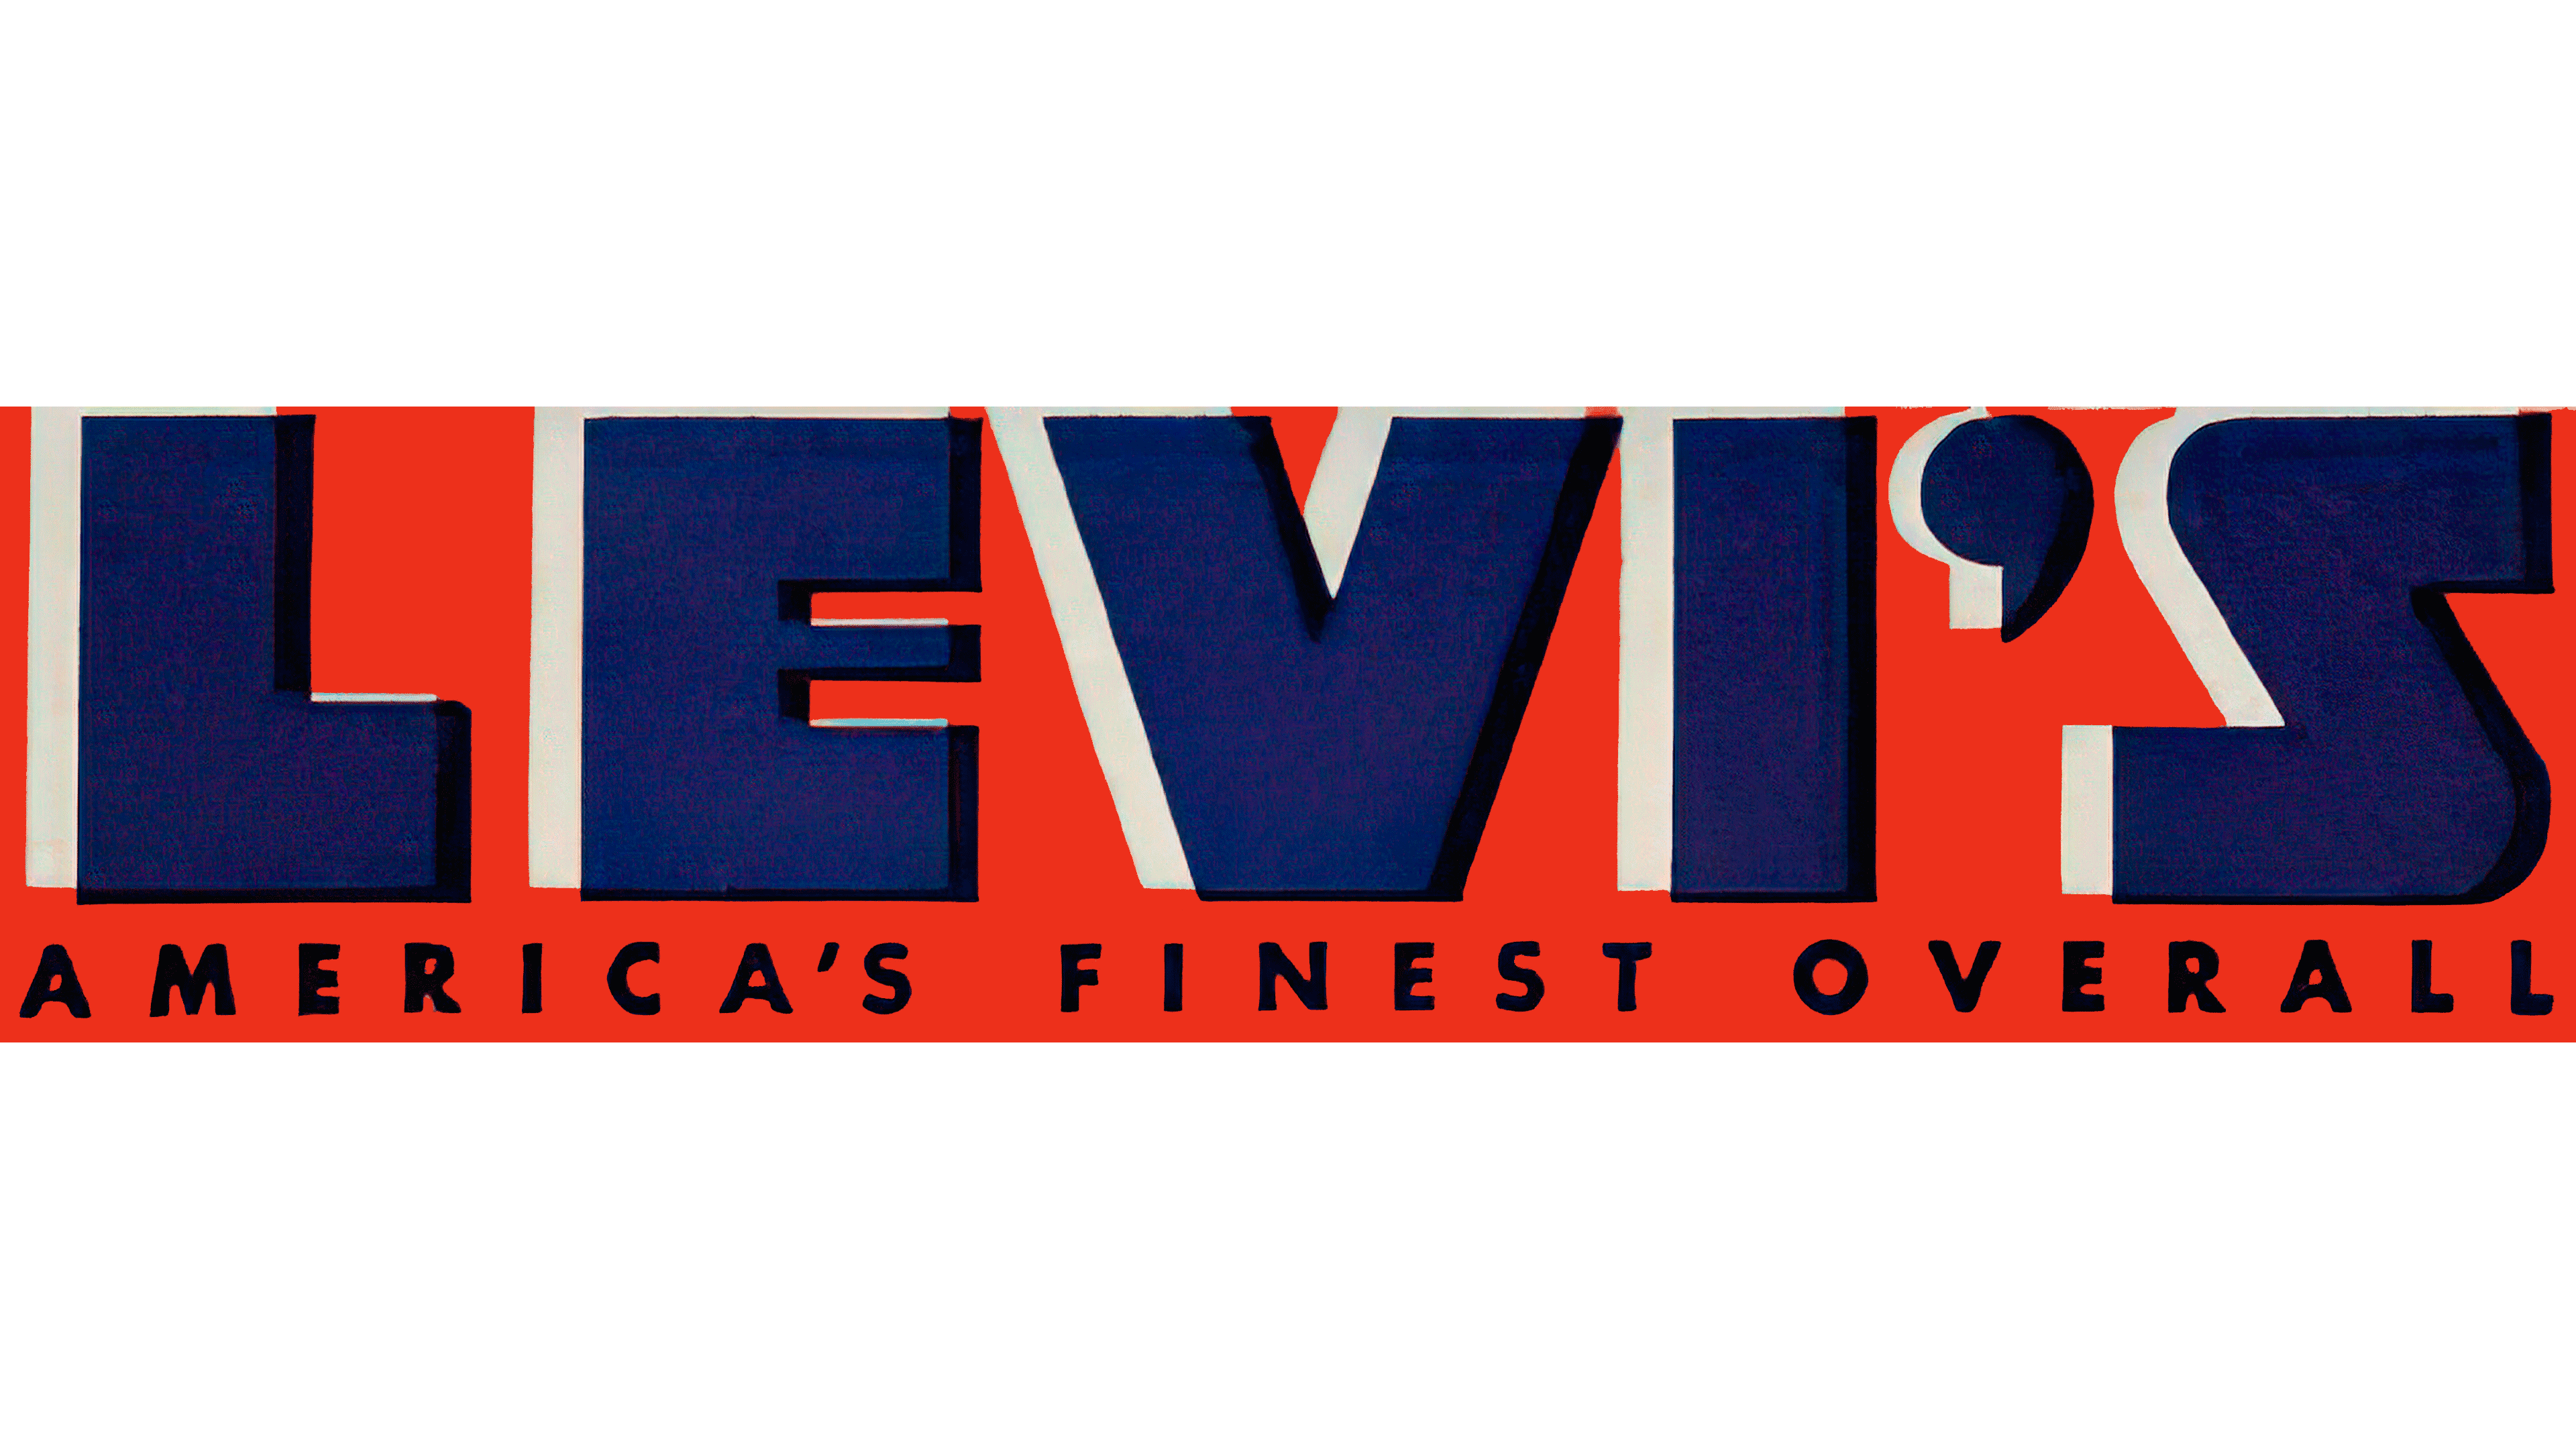 Download Levi's with Slogan Logo PNG and Vector (PDF, SVG, Ai, EPS) Free